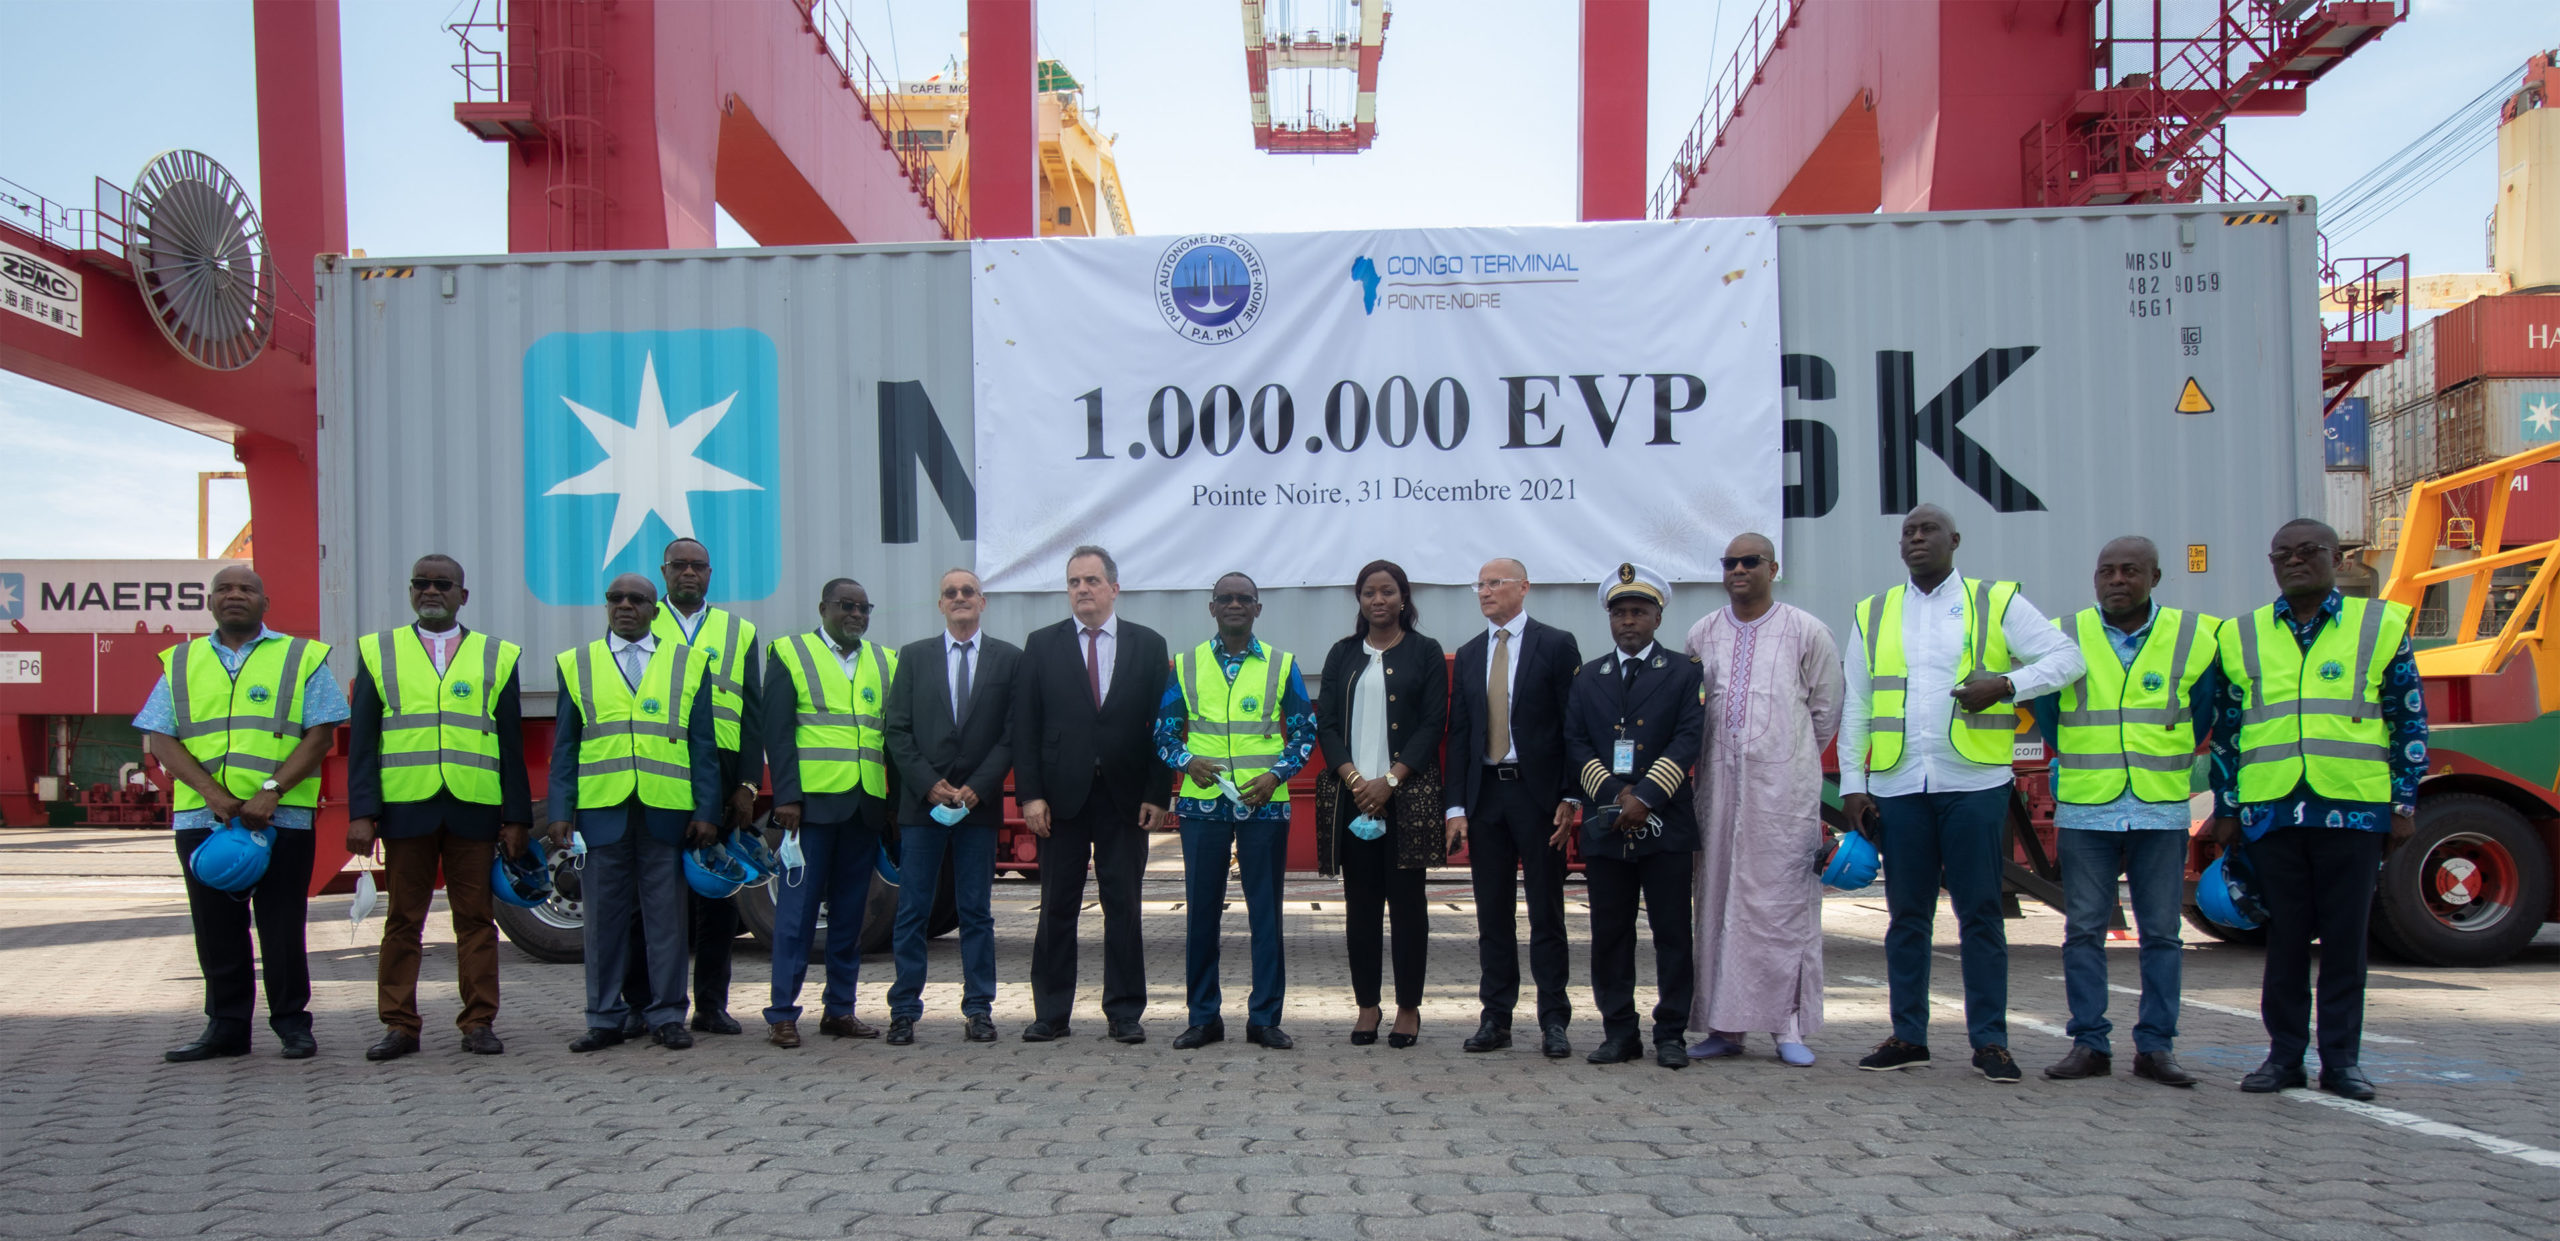 CONGO TERMINAL TOPS HISTORIC VOLUME BY HANDLING OVER A MILLION CONTAINERS IN 2021